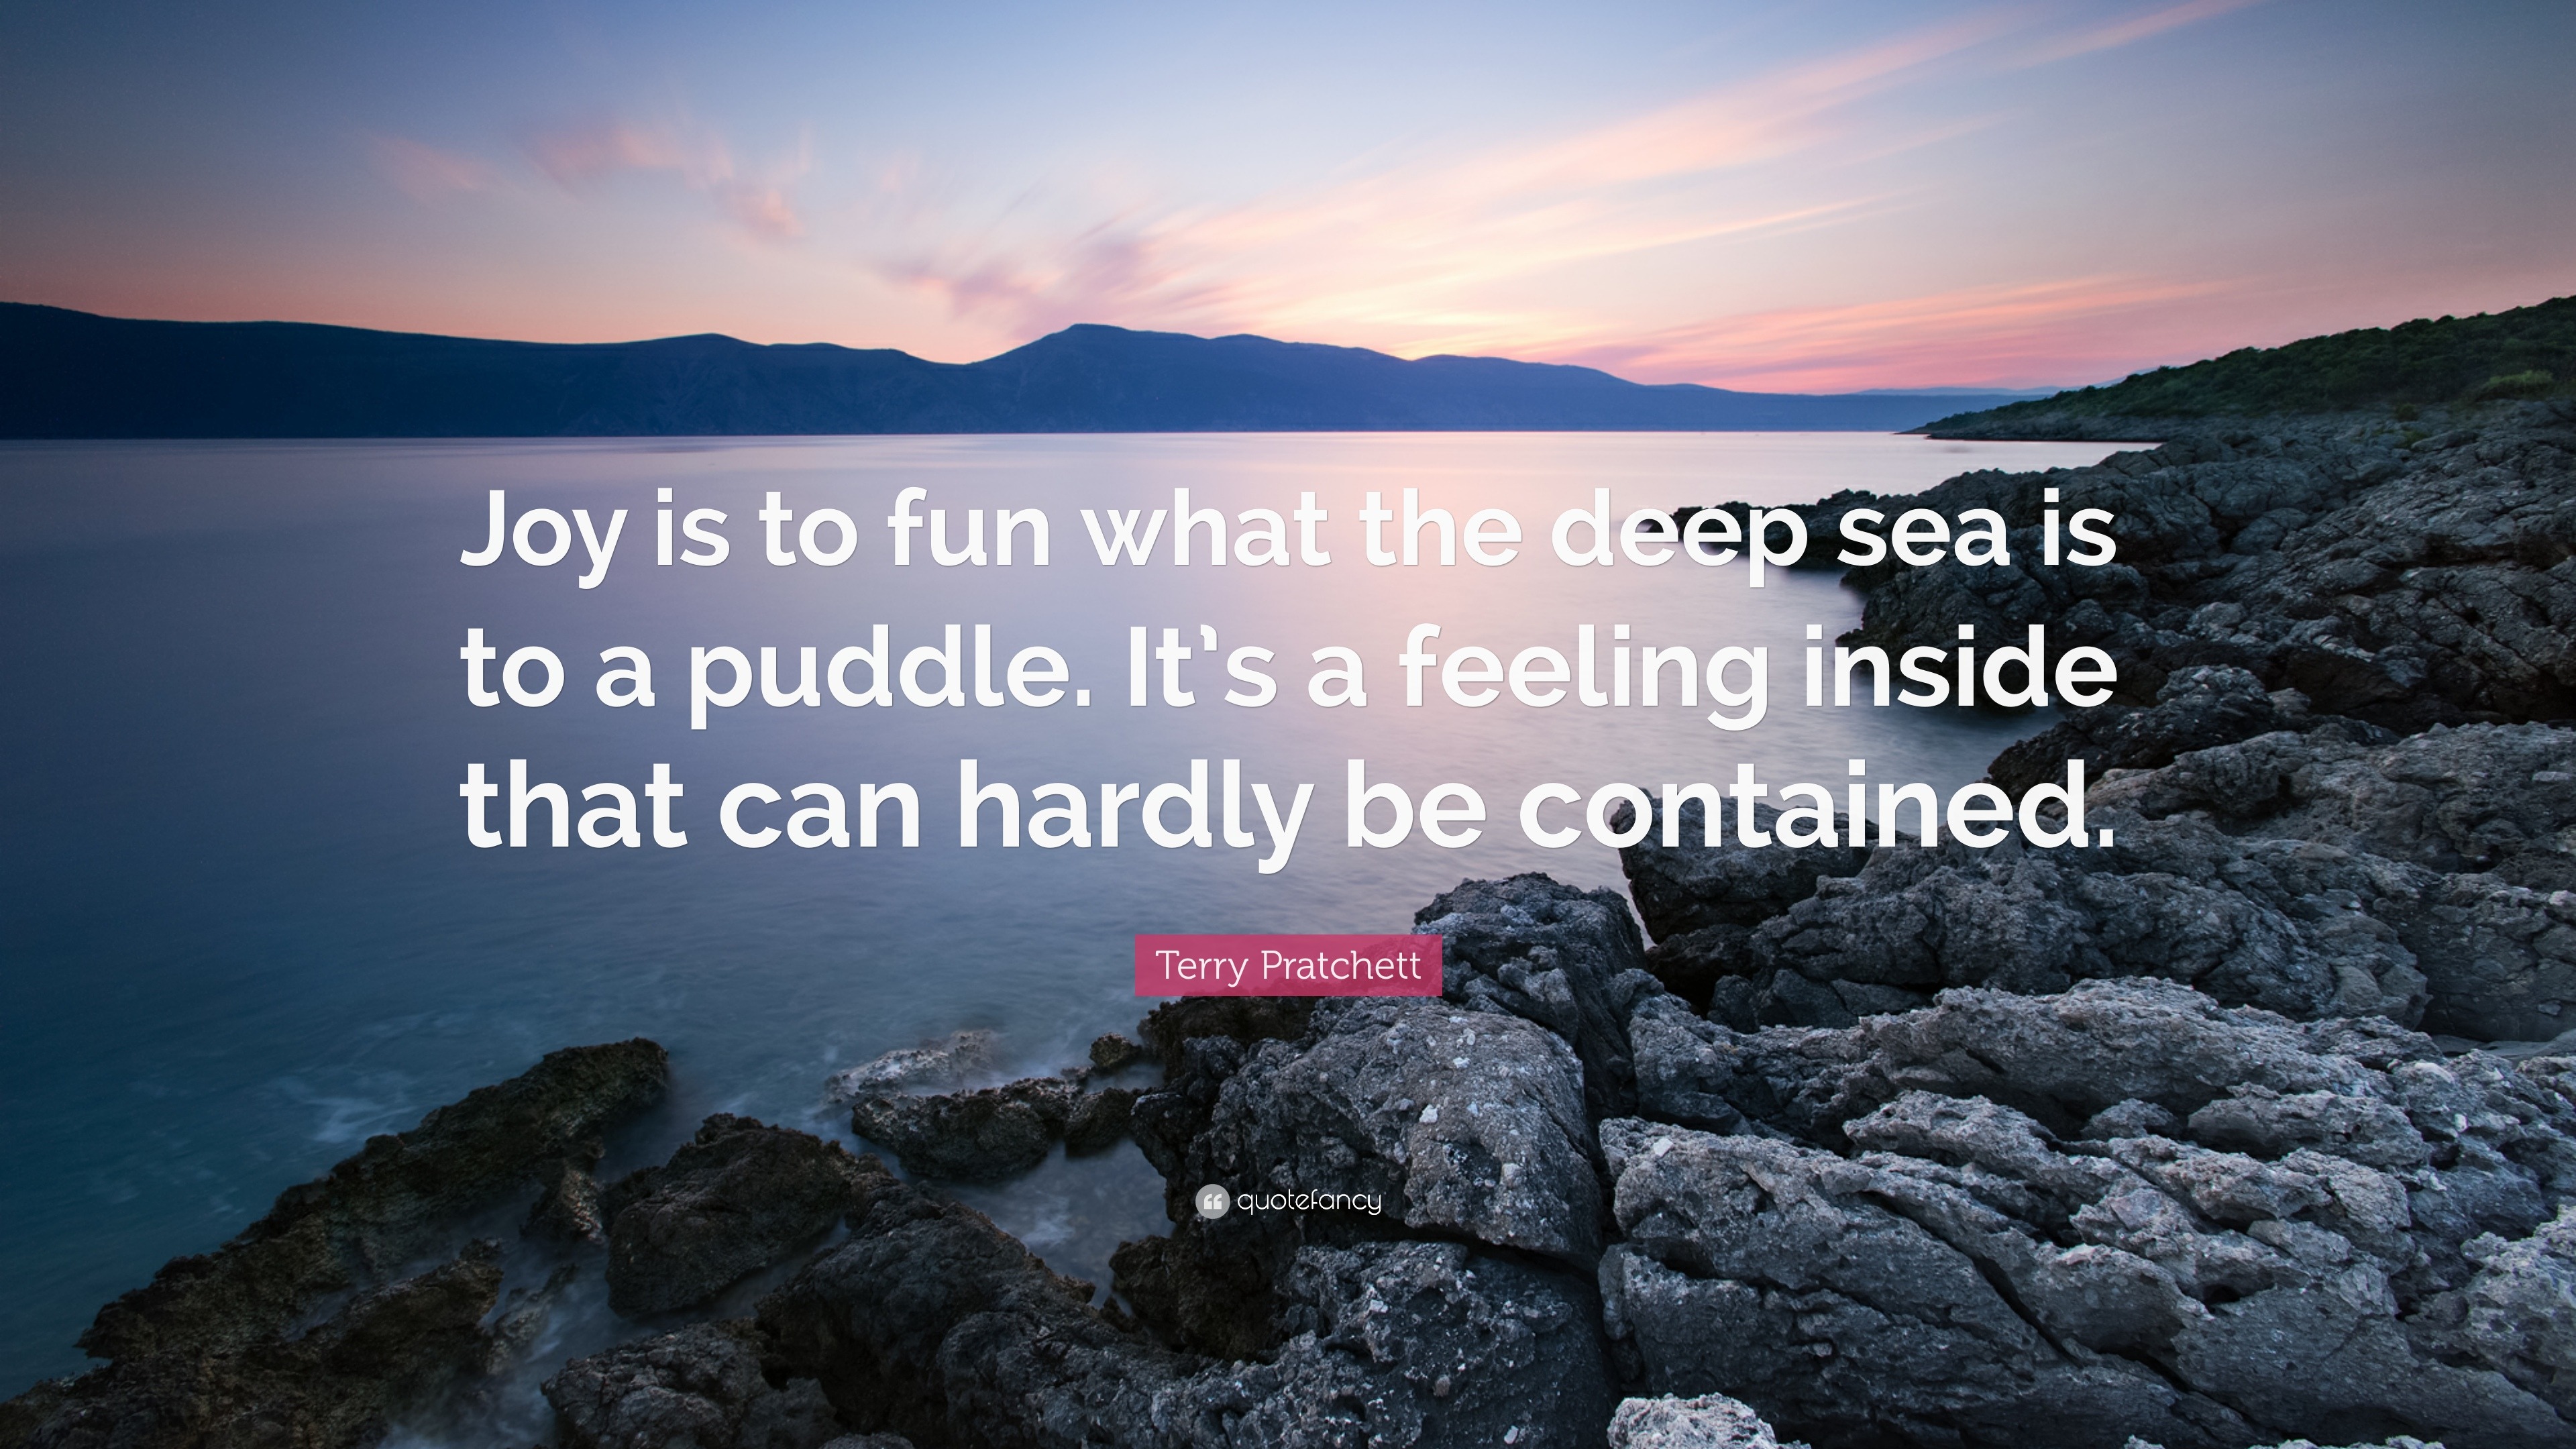 Terry Pratchett Quote: “Joy is to fun what the deep sea is to a puddle. It's